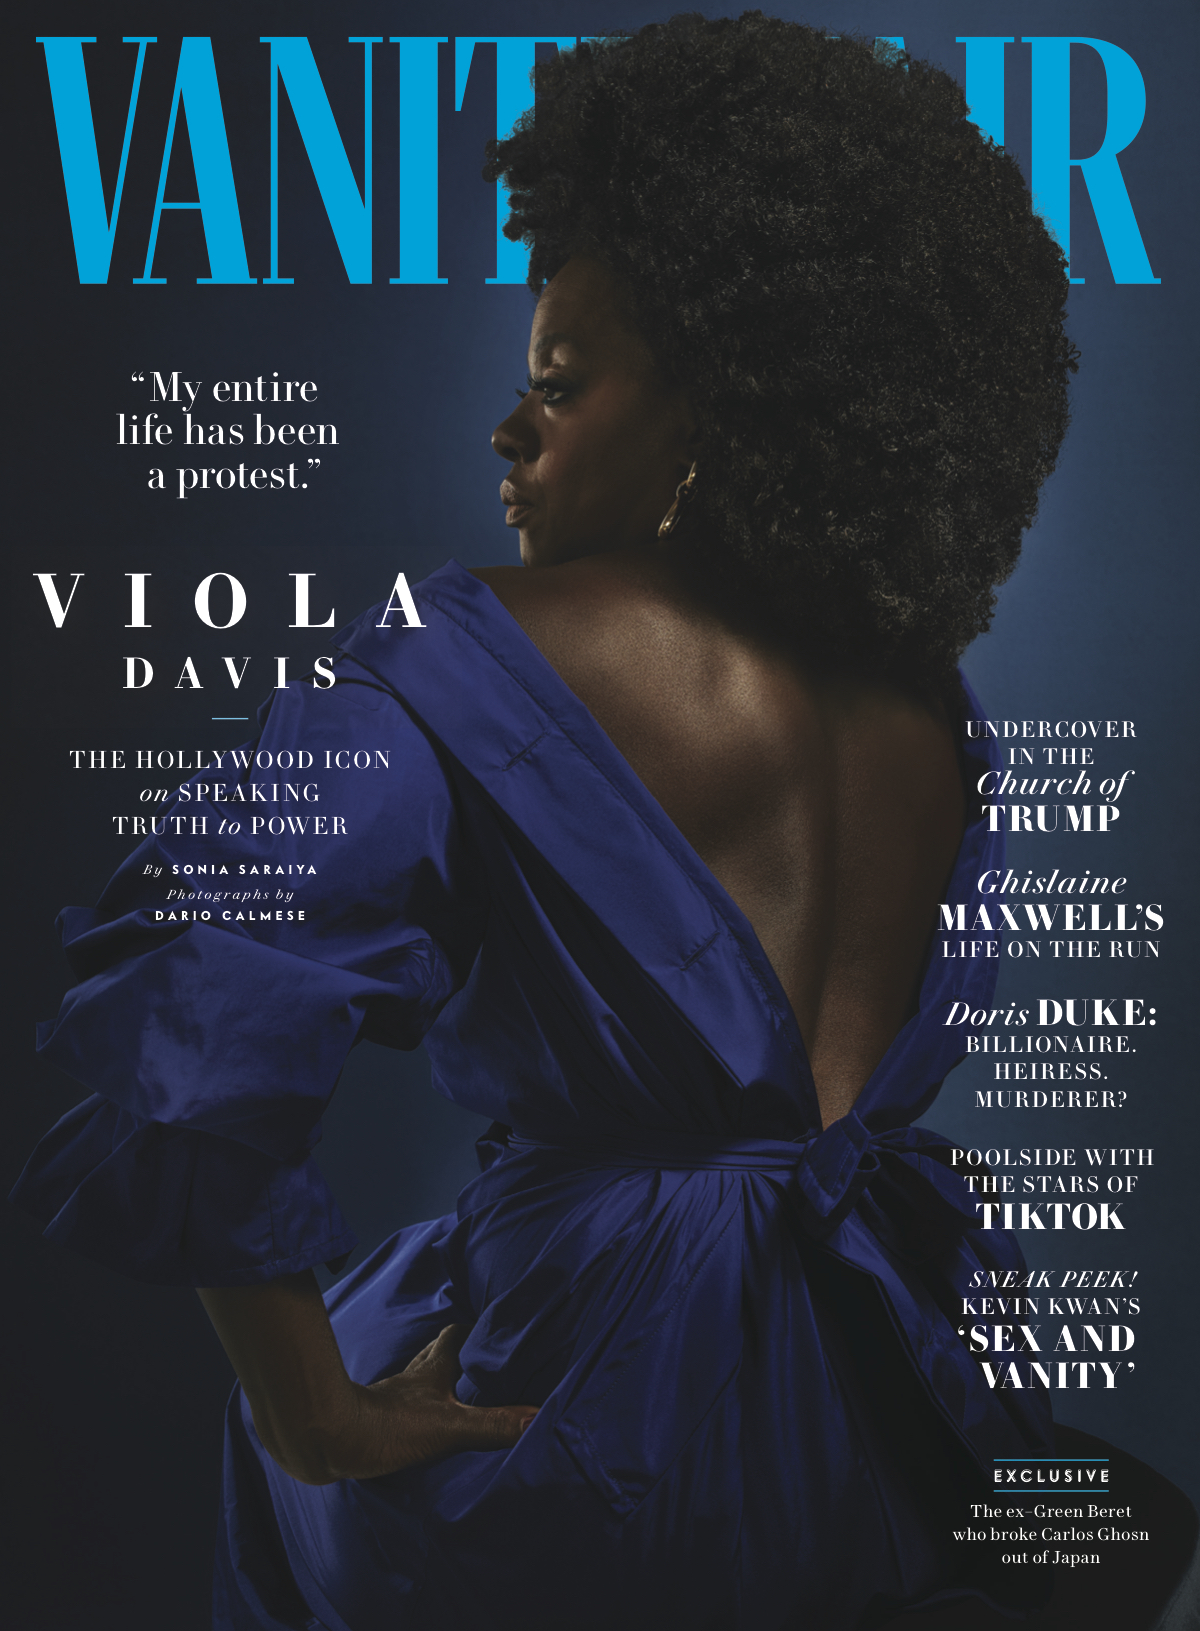 Vanity Fair - Best Fashion and Beauty Cover